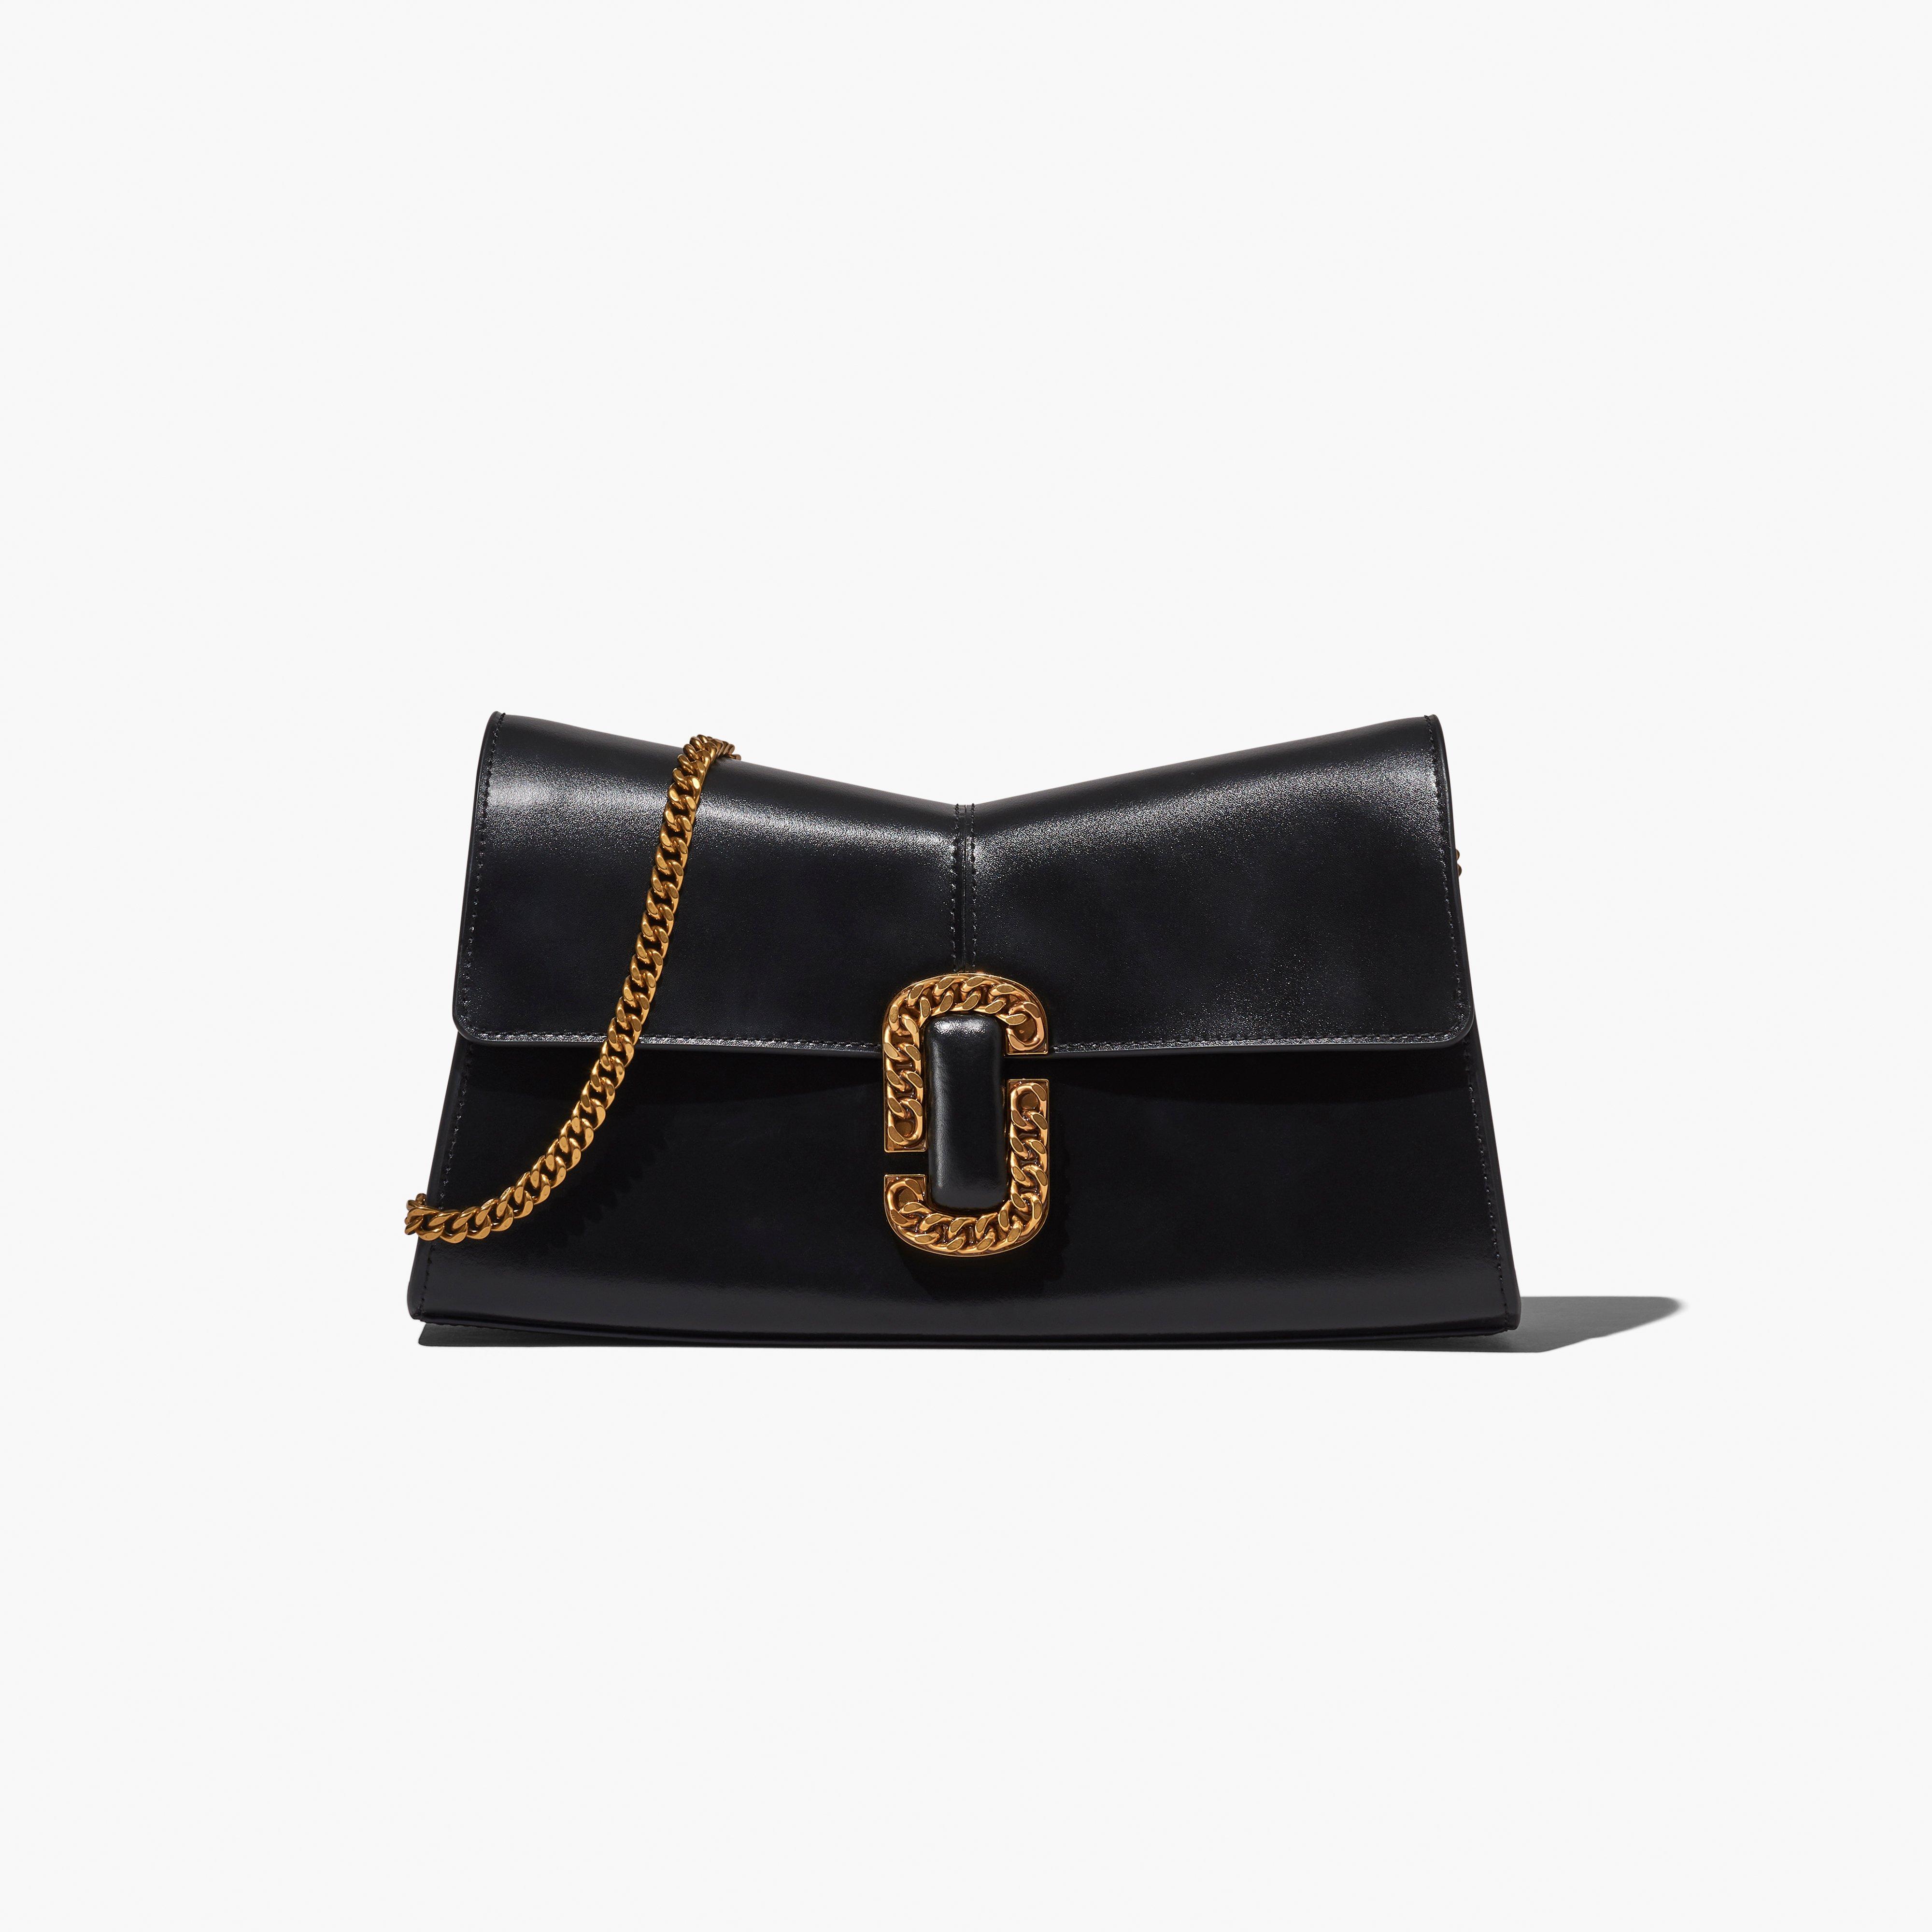 Marc by Marc jacobs The St. Marc Convertible Clutch,BLACK